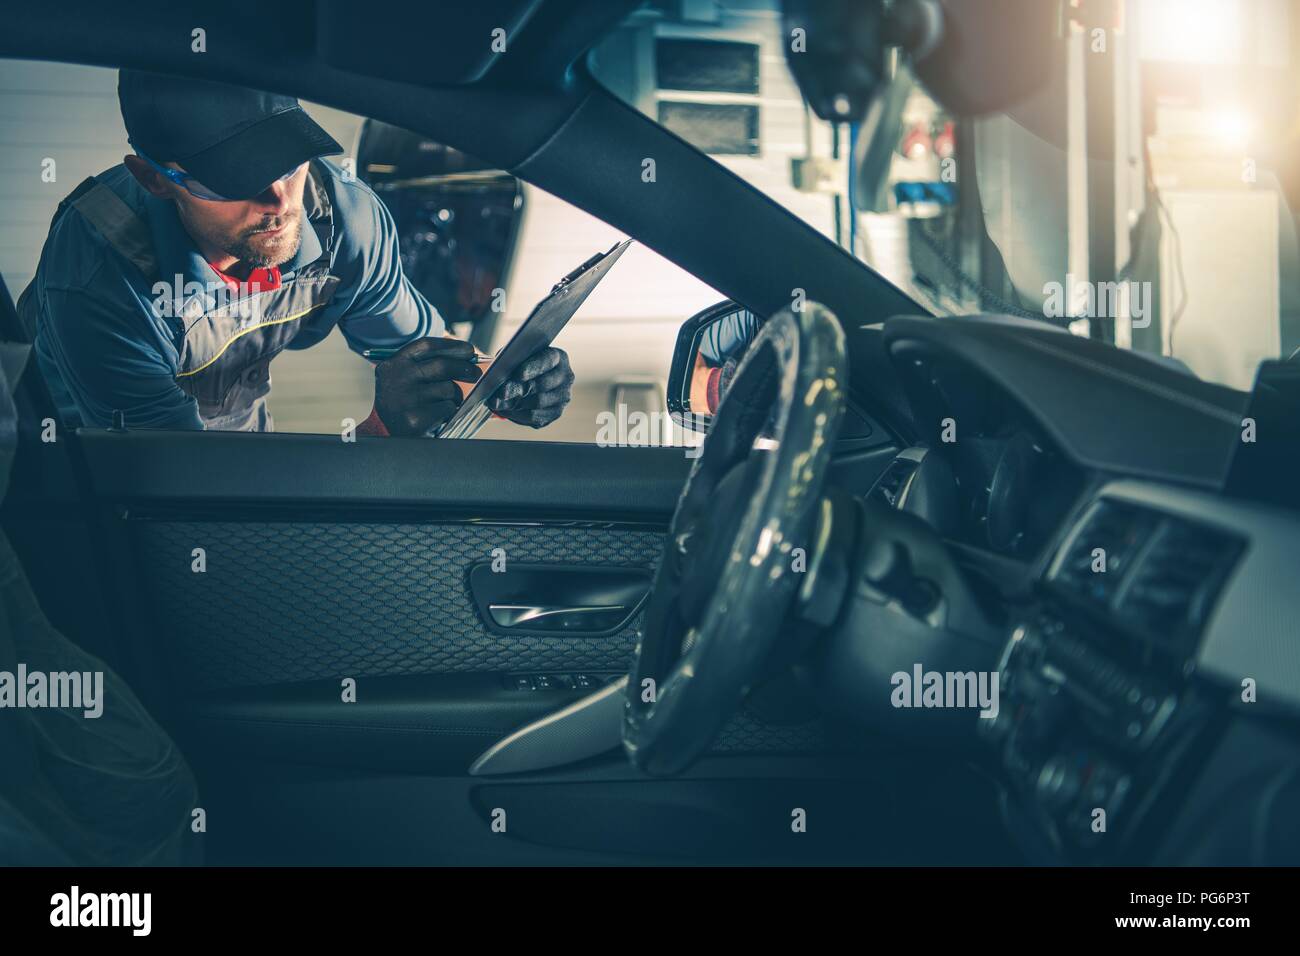 Auto Service Worker Inspection. Checking For Milage and On Board Computer Error Codes. Stock Photo